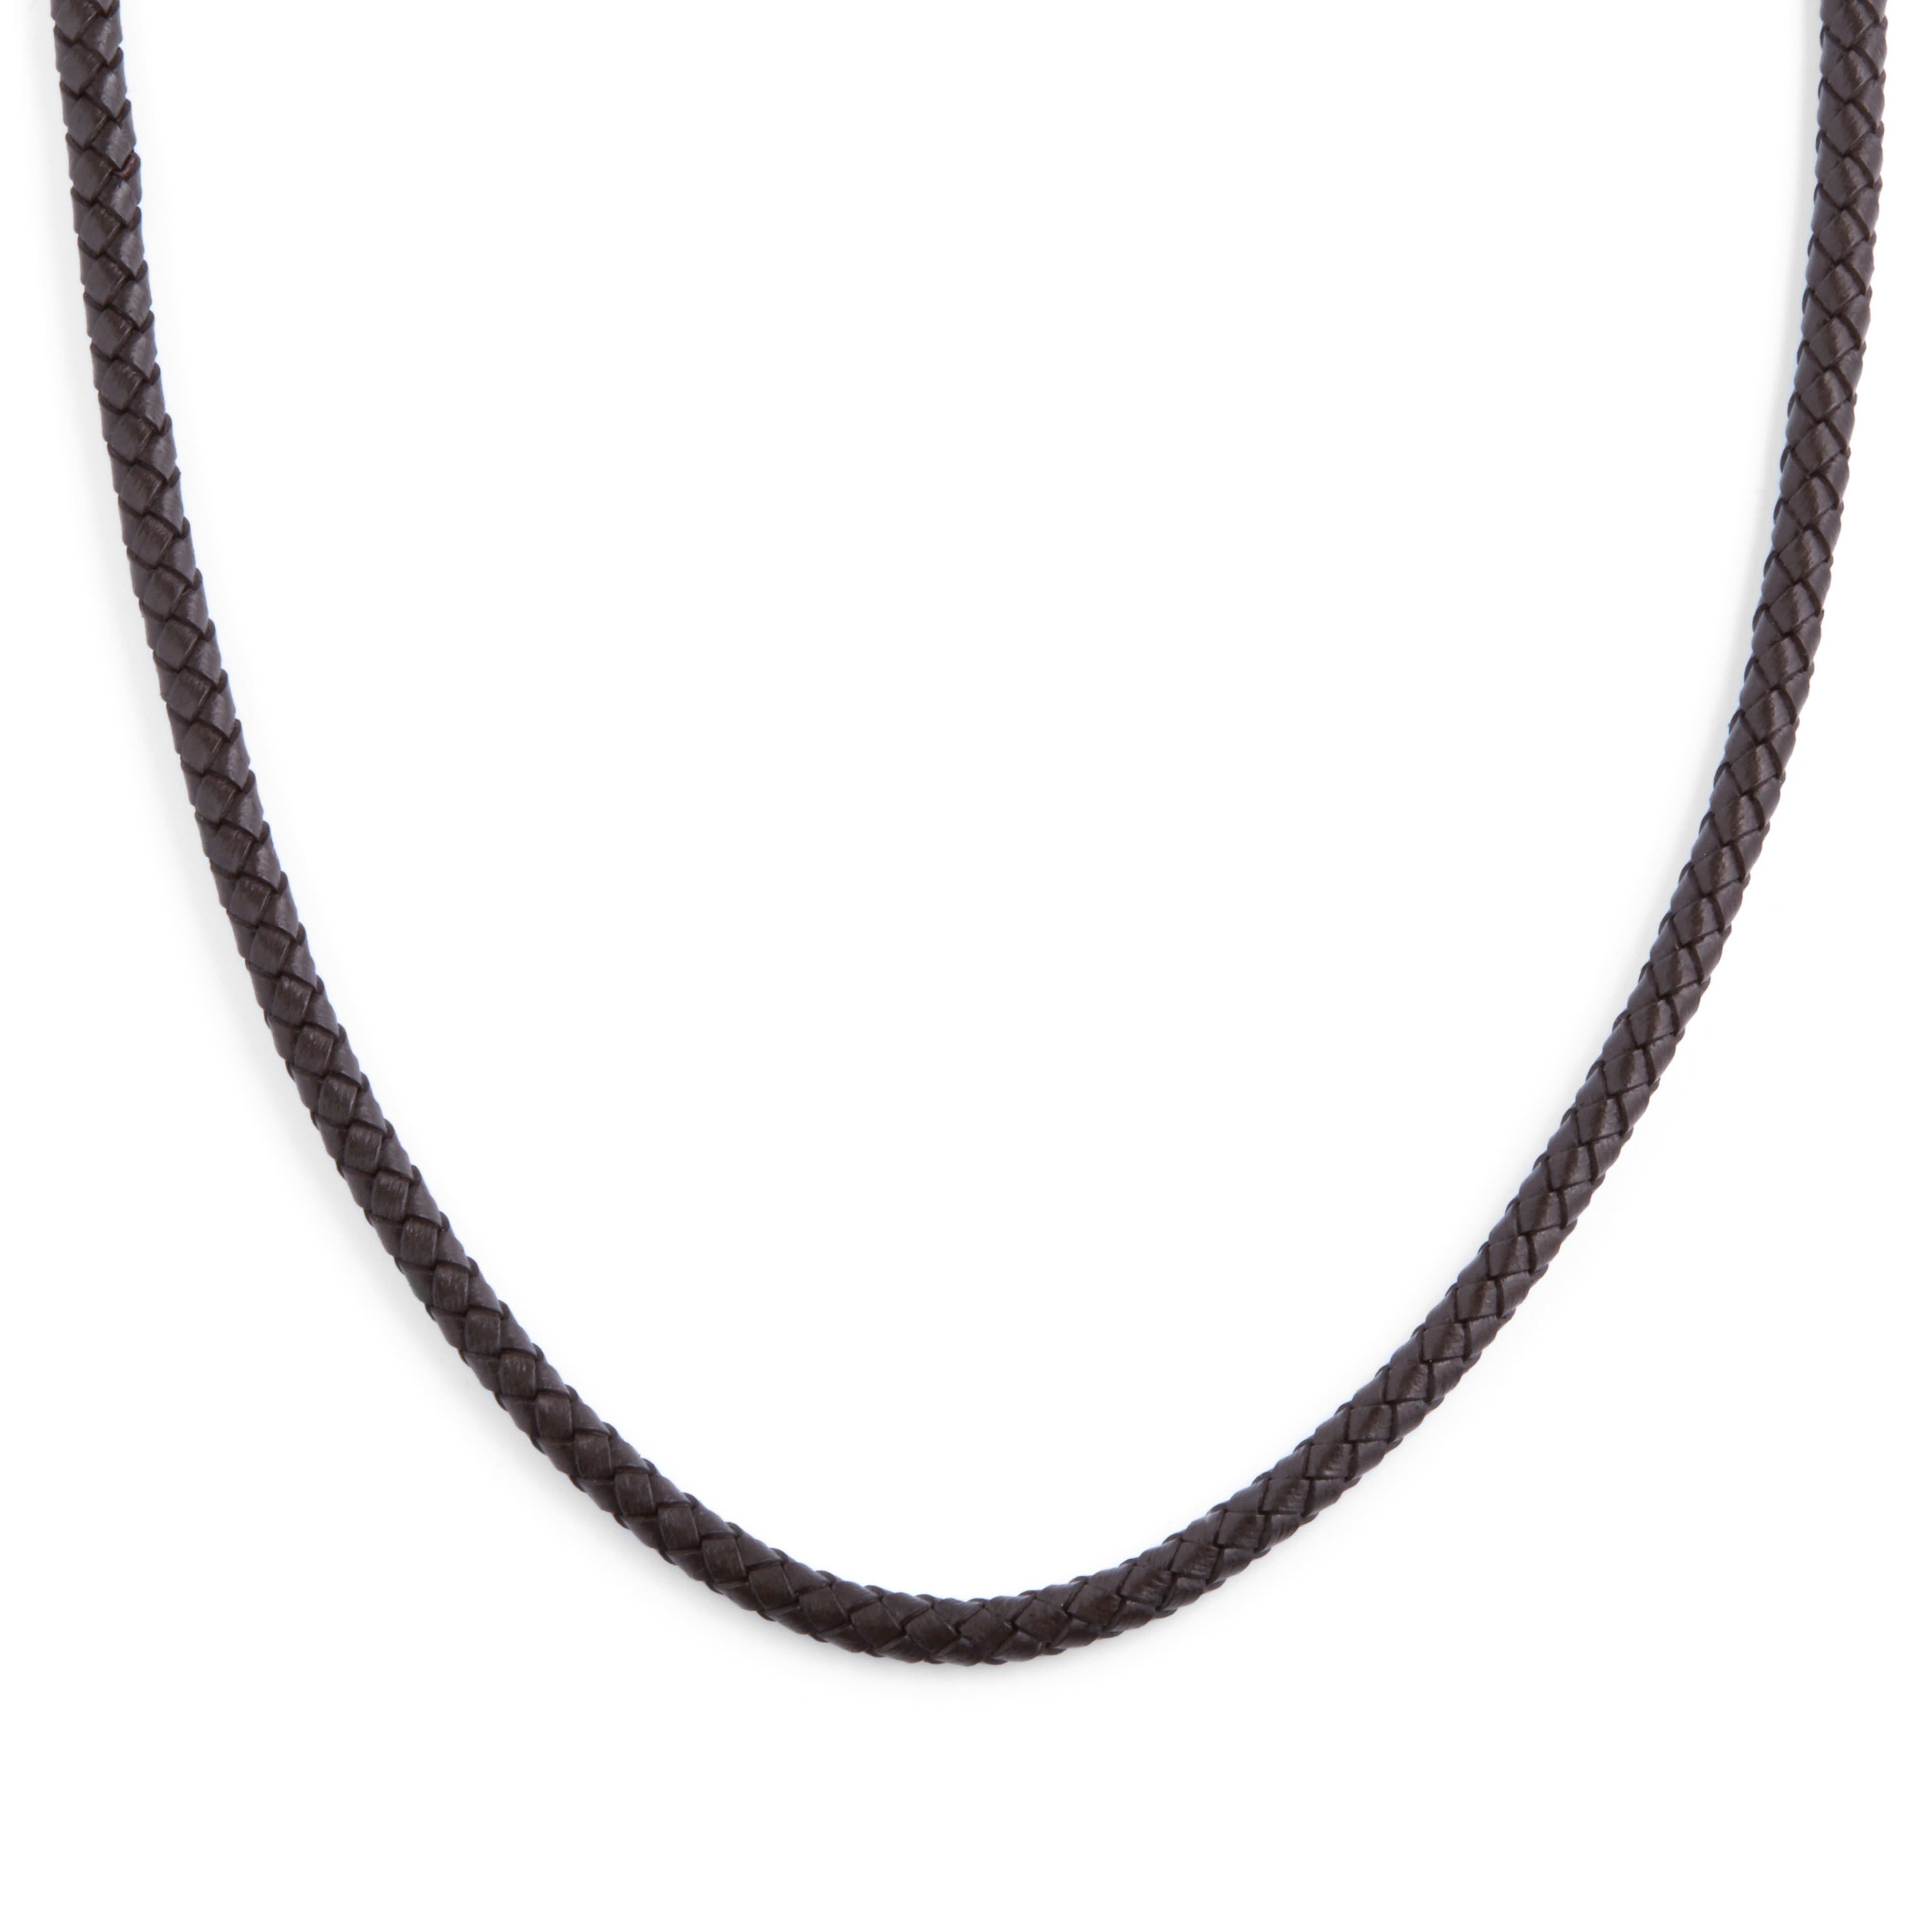 5 mm Brown Leather Woven Necklace